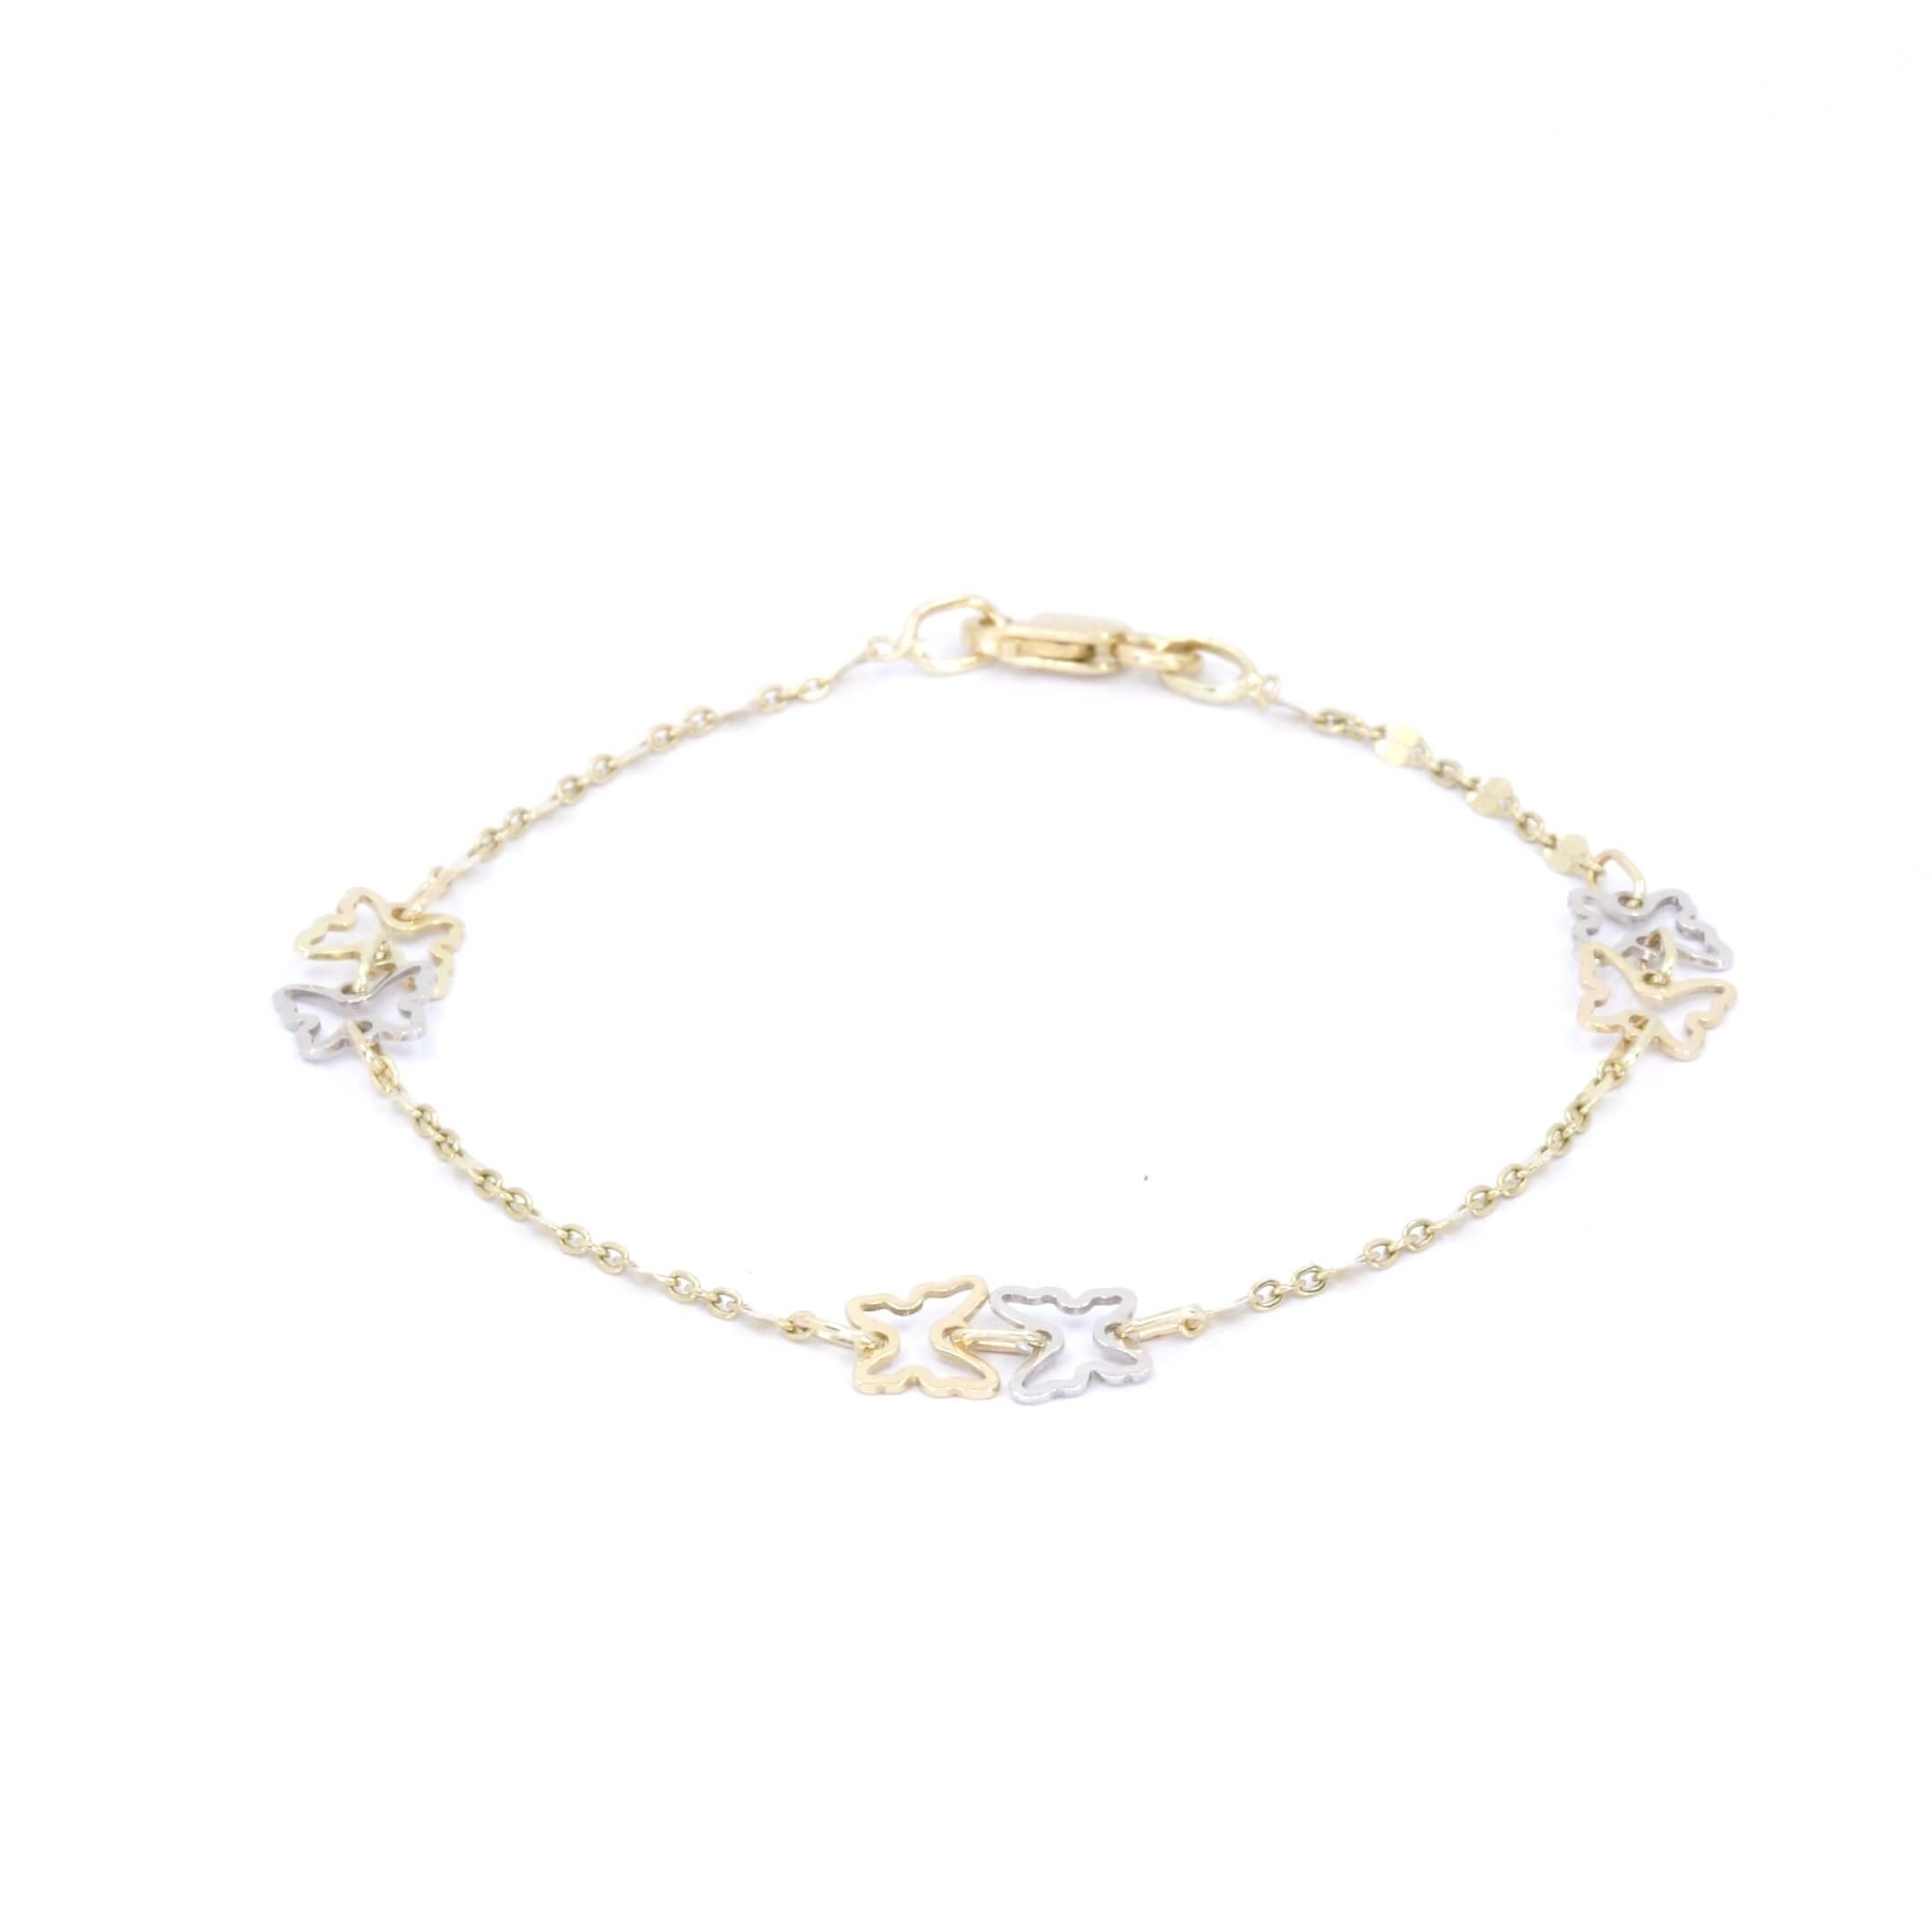 14K white-yellow gold bracelet with butterflies